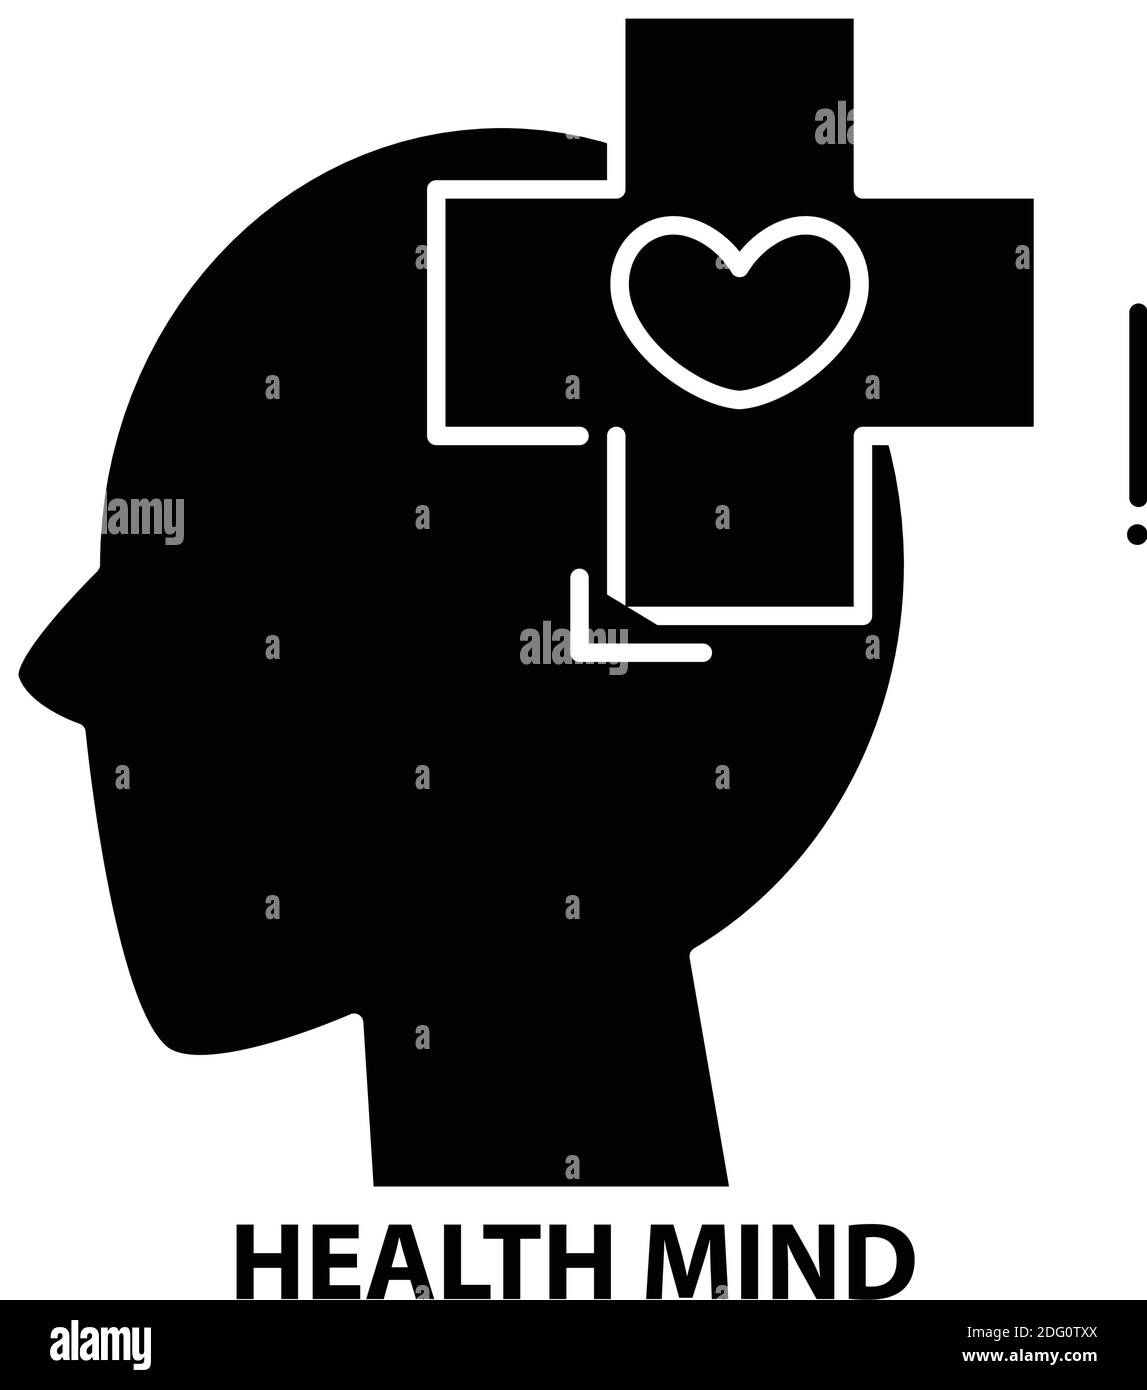 health mind icon, black vector sign with editable strokes, concept illustration Stock Vector